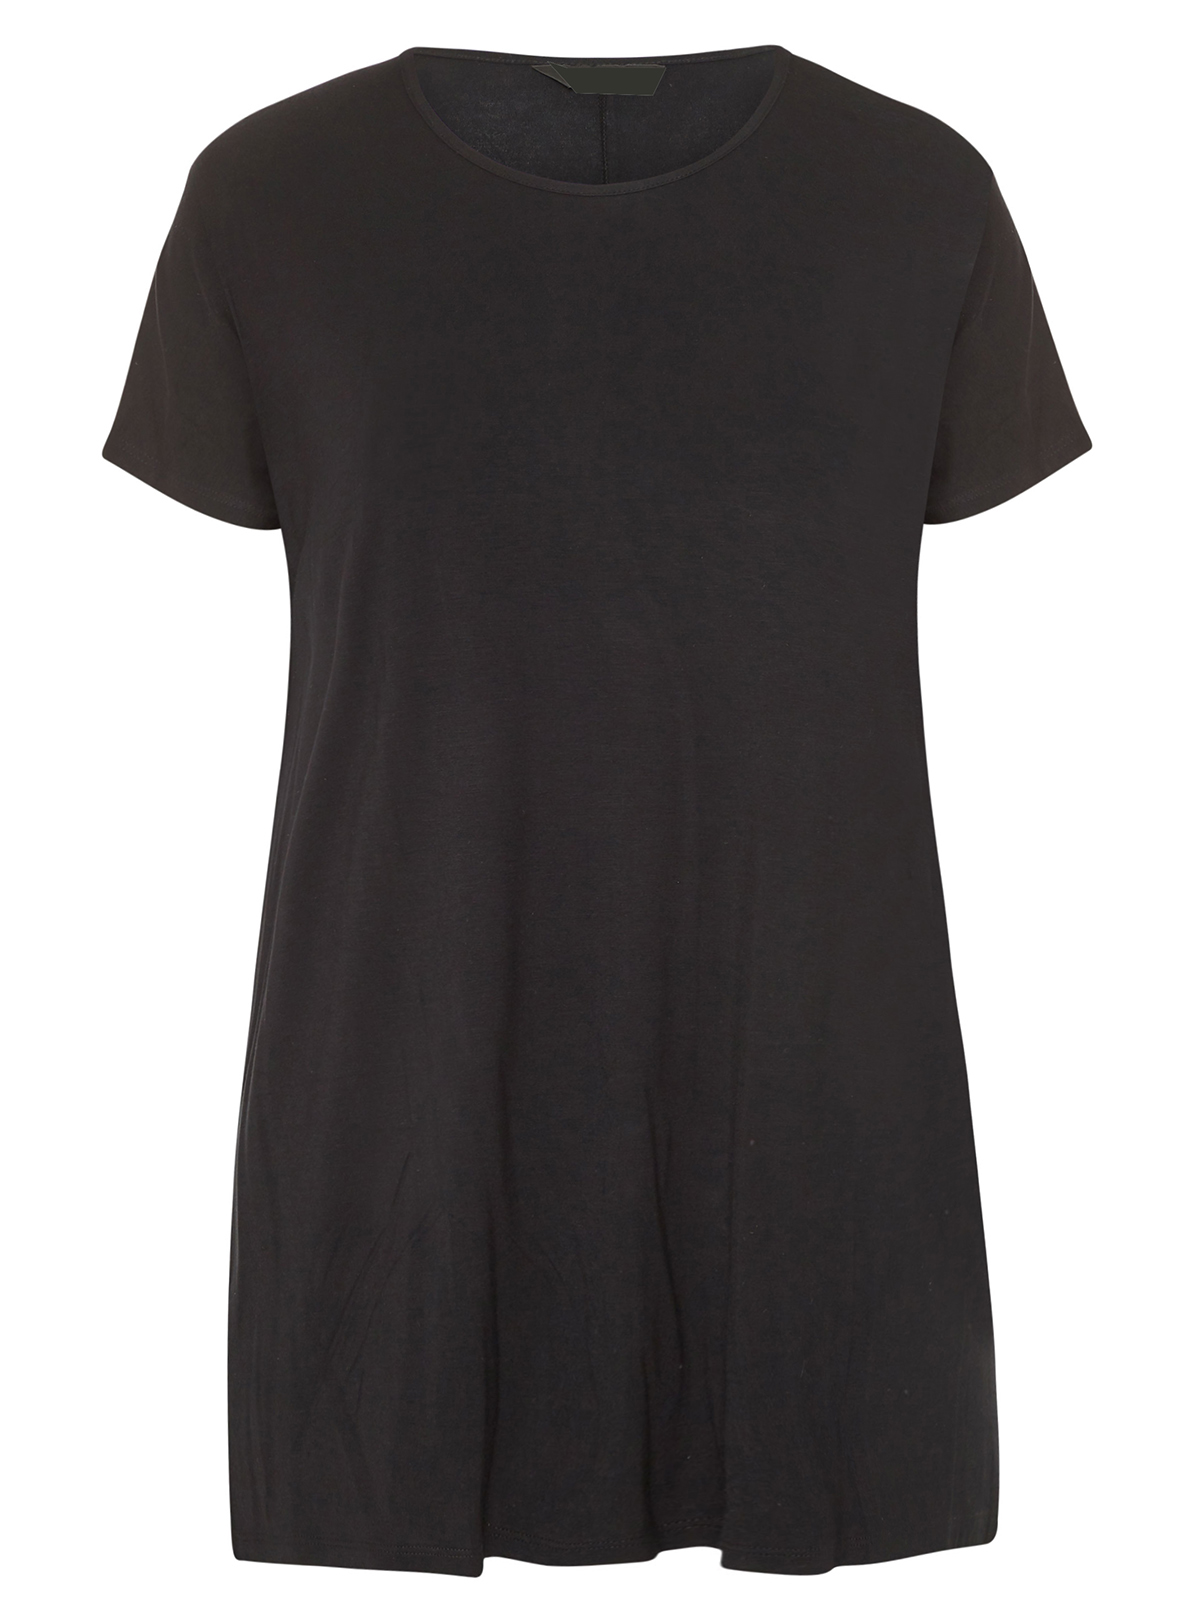 CURVE - - Curve BLACK Grown On Sleeve Longline Top - Plus Size 16 to 38/40